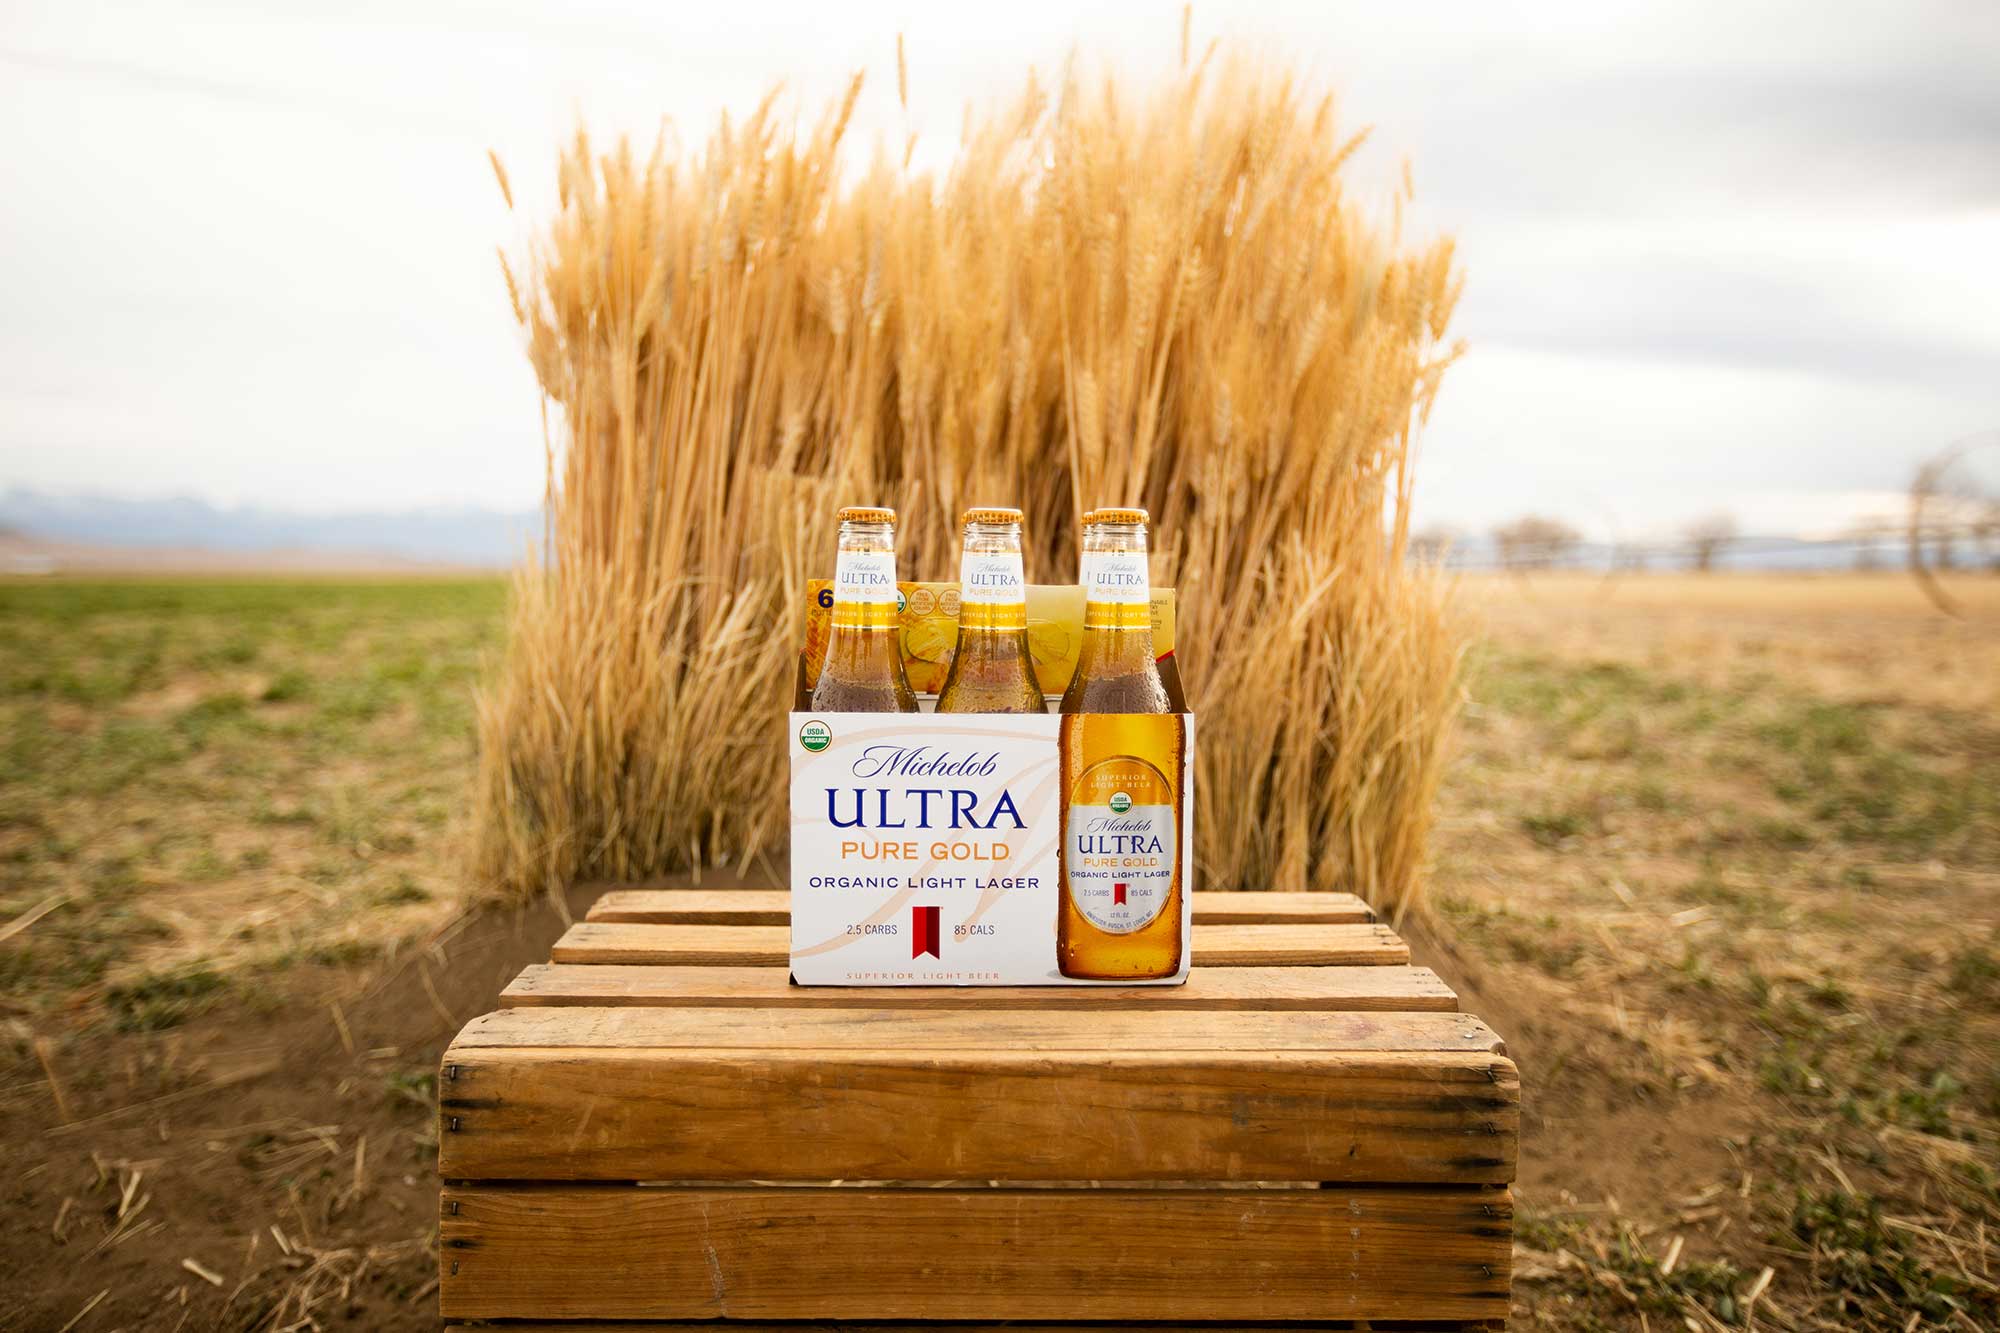 michelob-organic-campaign-is-phony-attempt-to-woo-farmers-agdaily